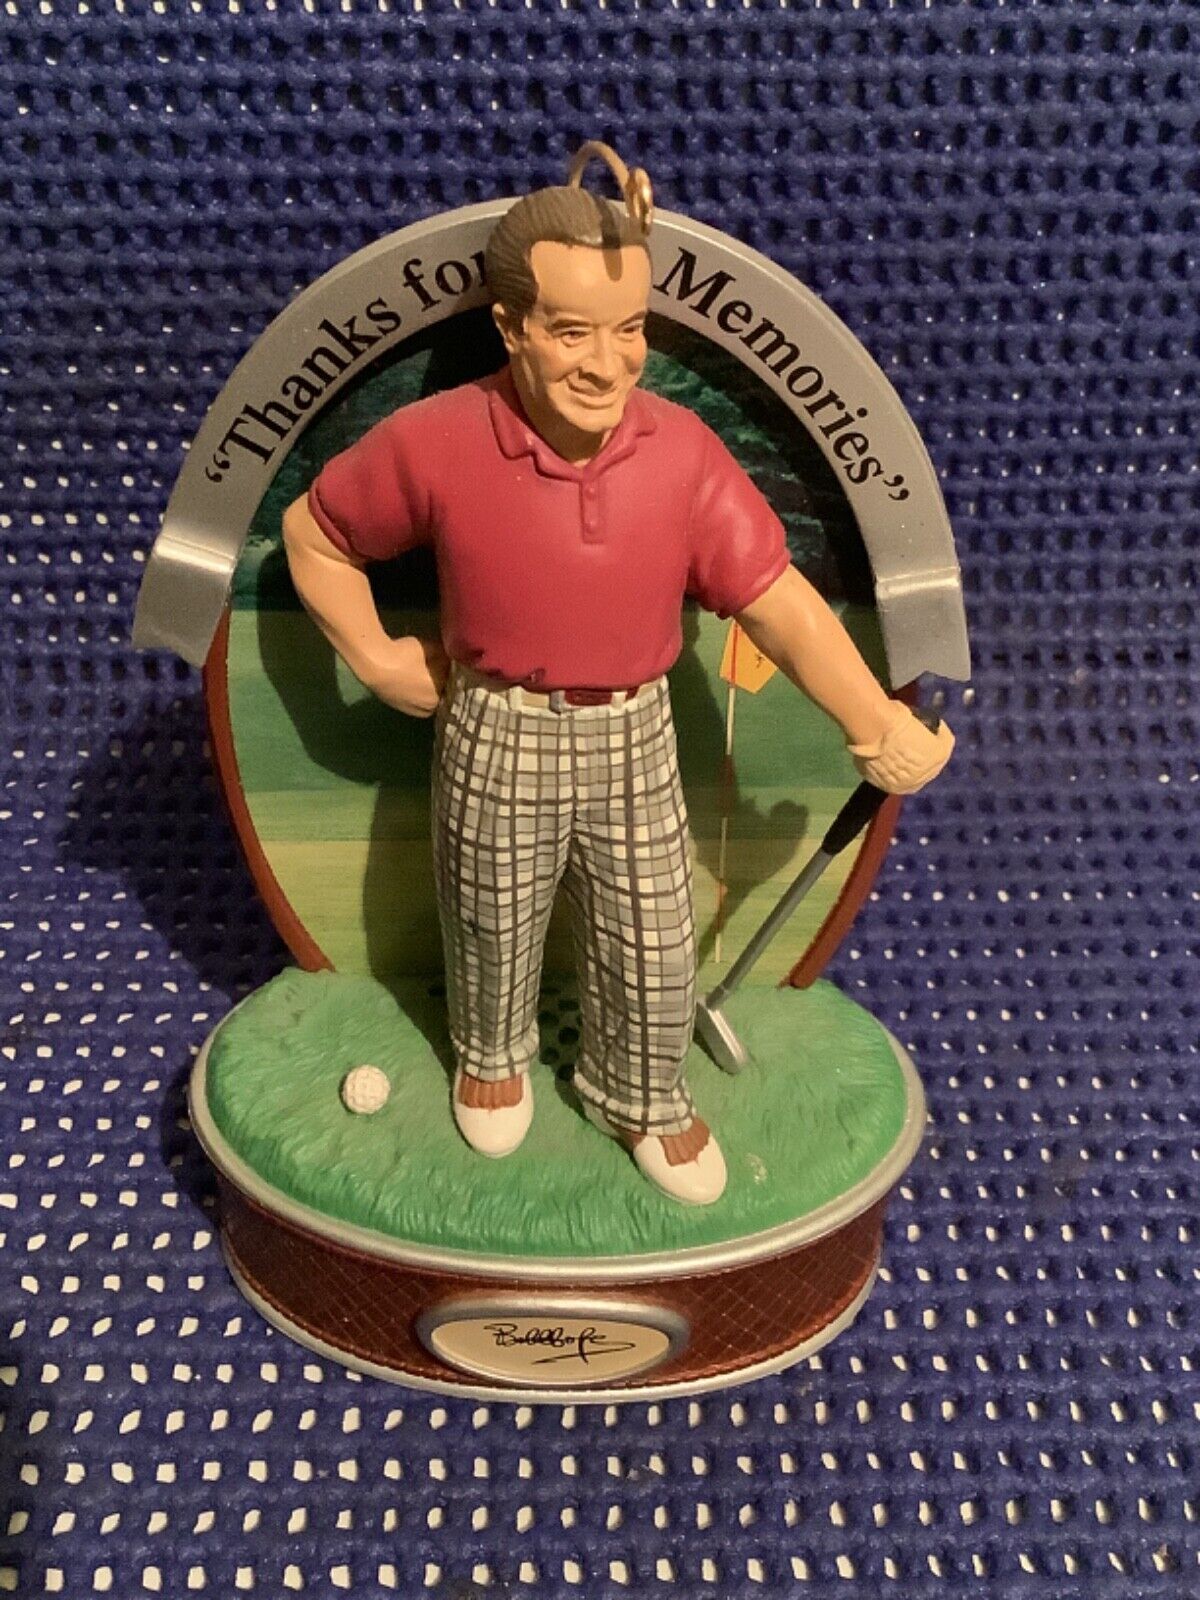 Bob Hope Thanks for the memories musical Ornament Carlton Cards 1999- Preowned